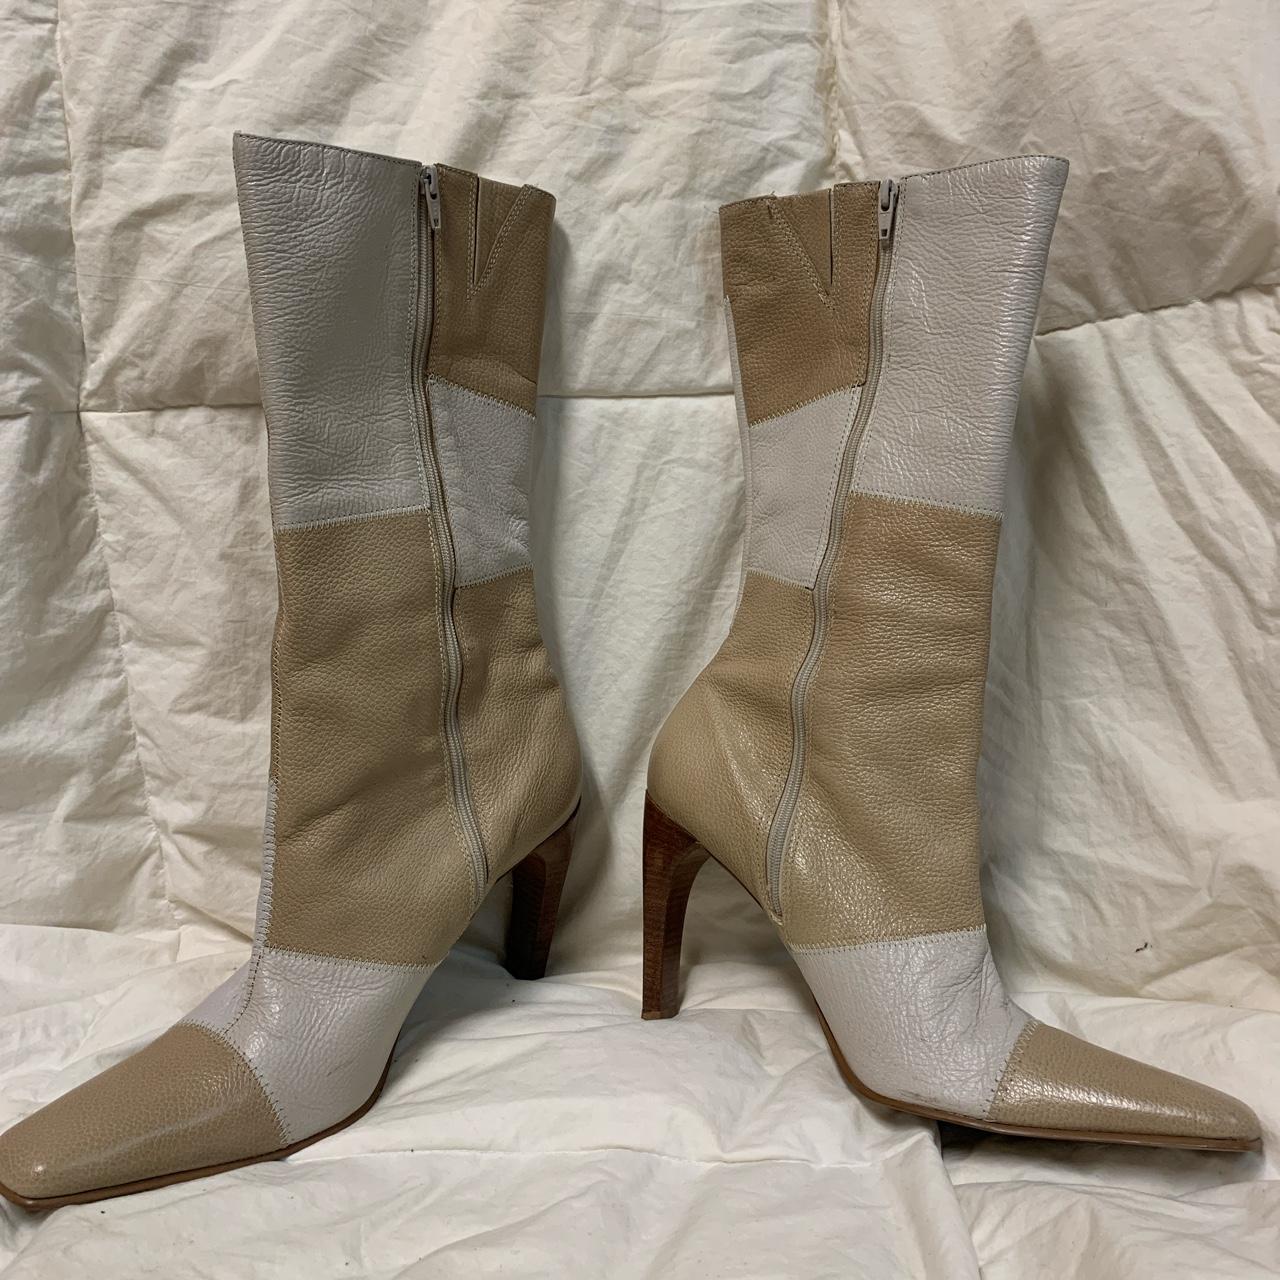 Women's Cream and Brown Courts (4)